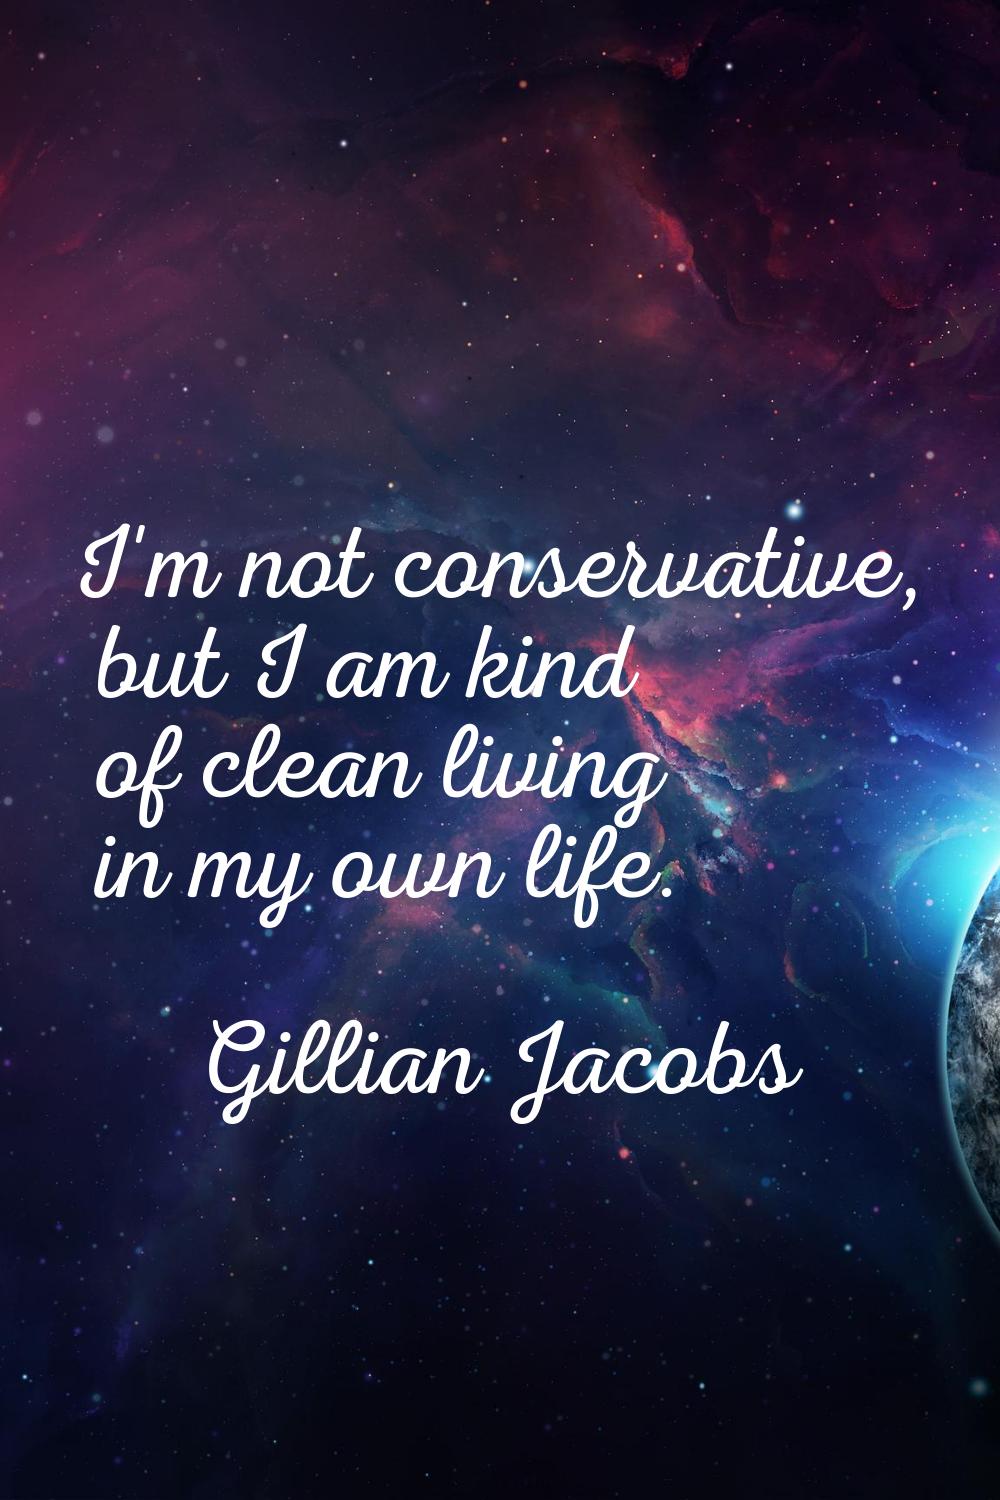 I'm not conservative, but I am kind of clean living in my own life.